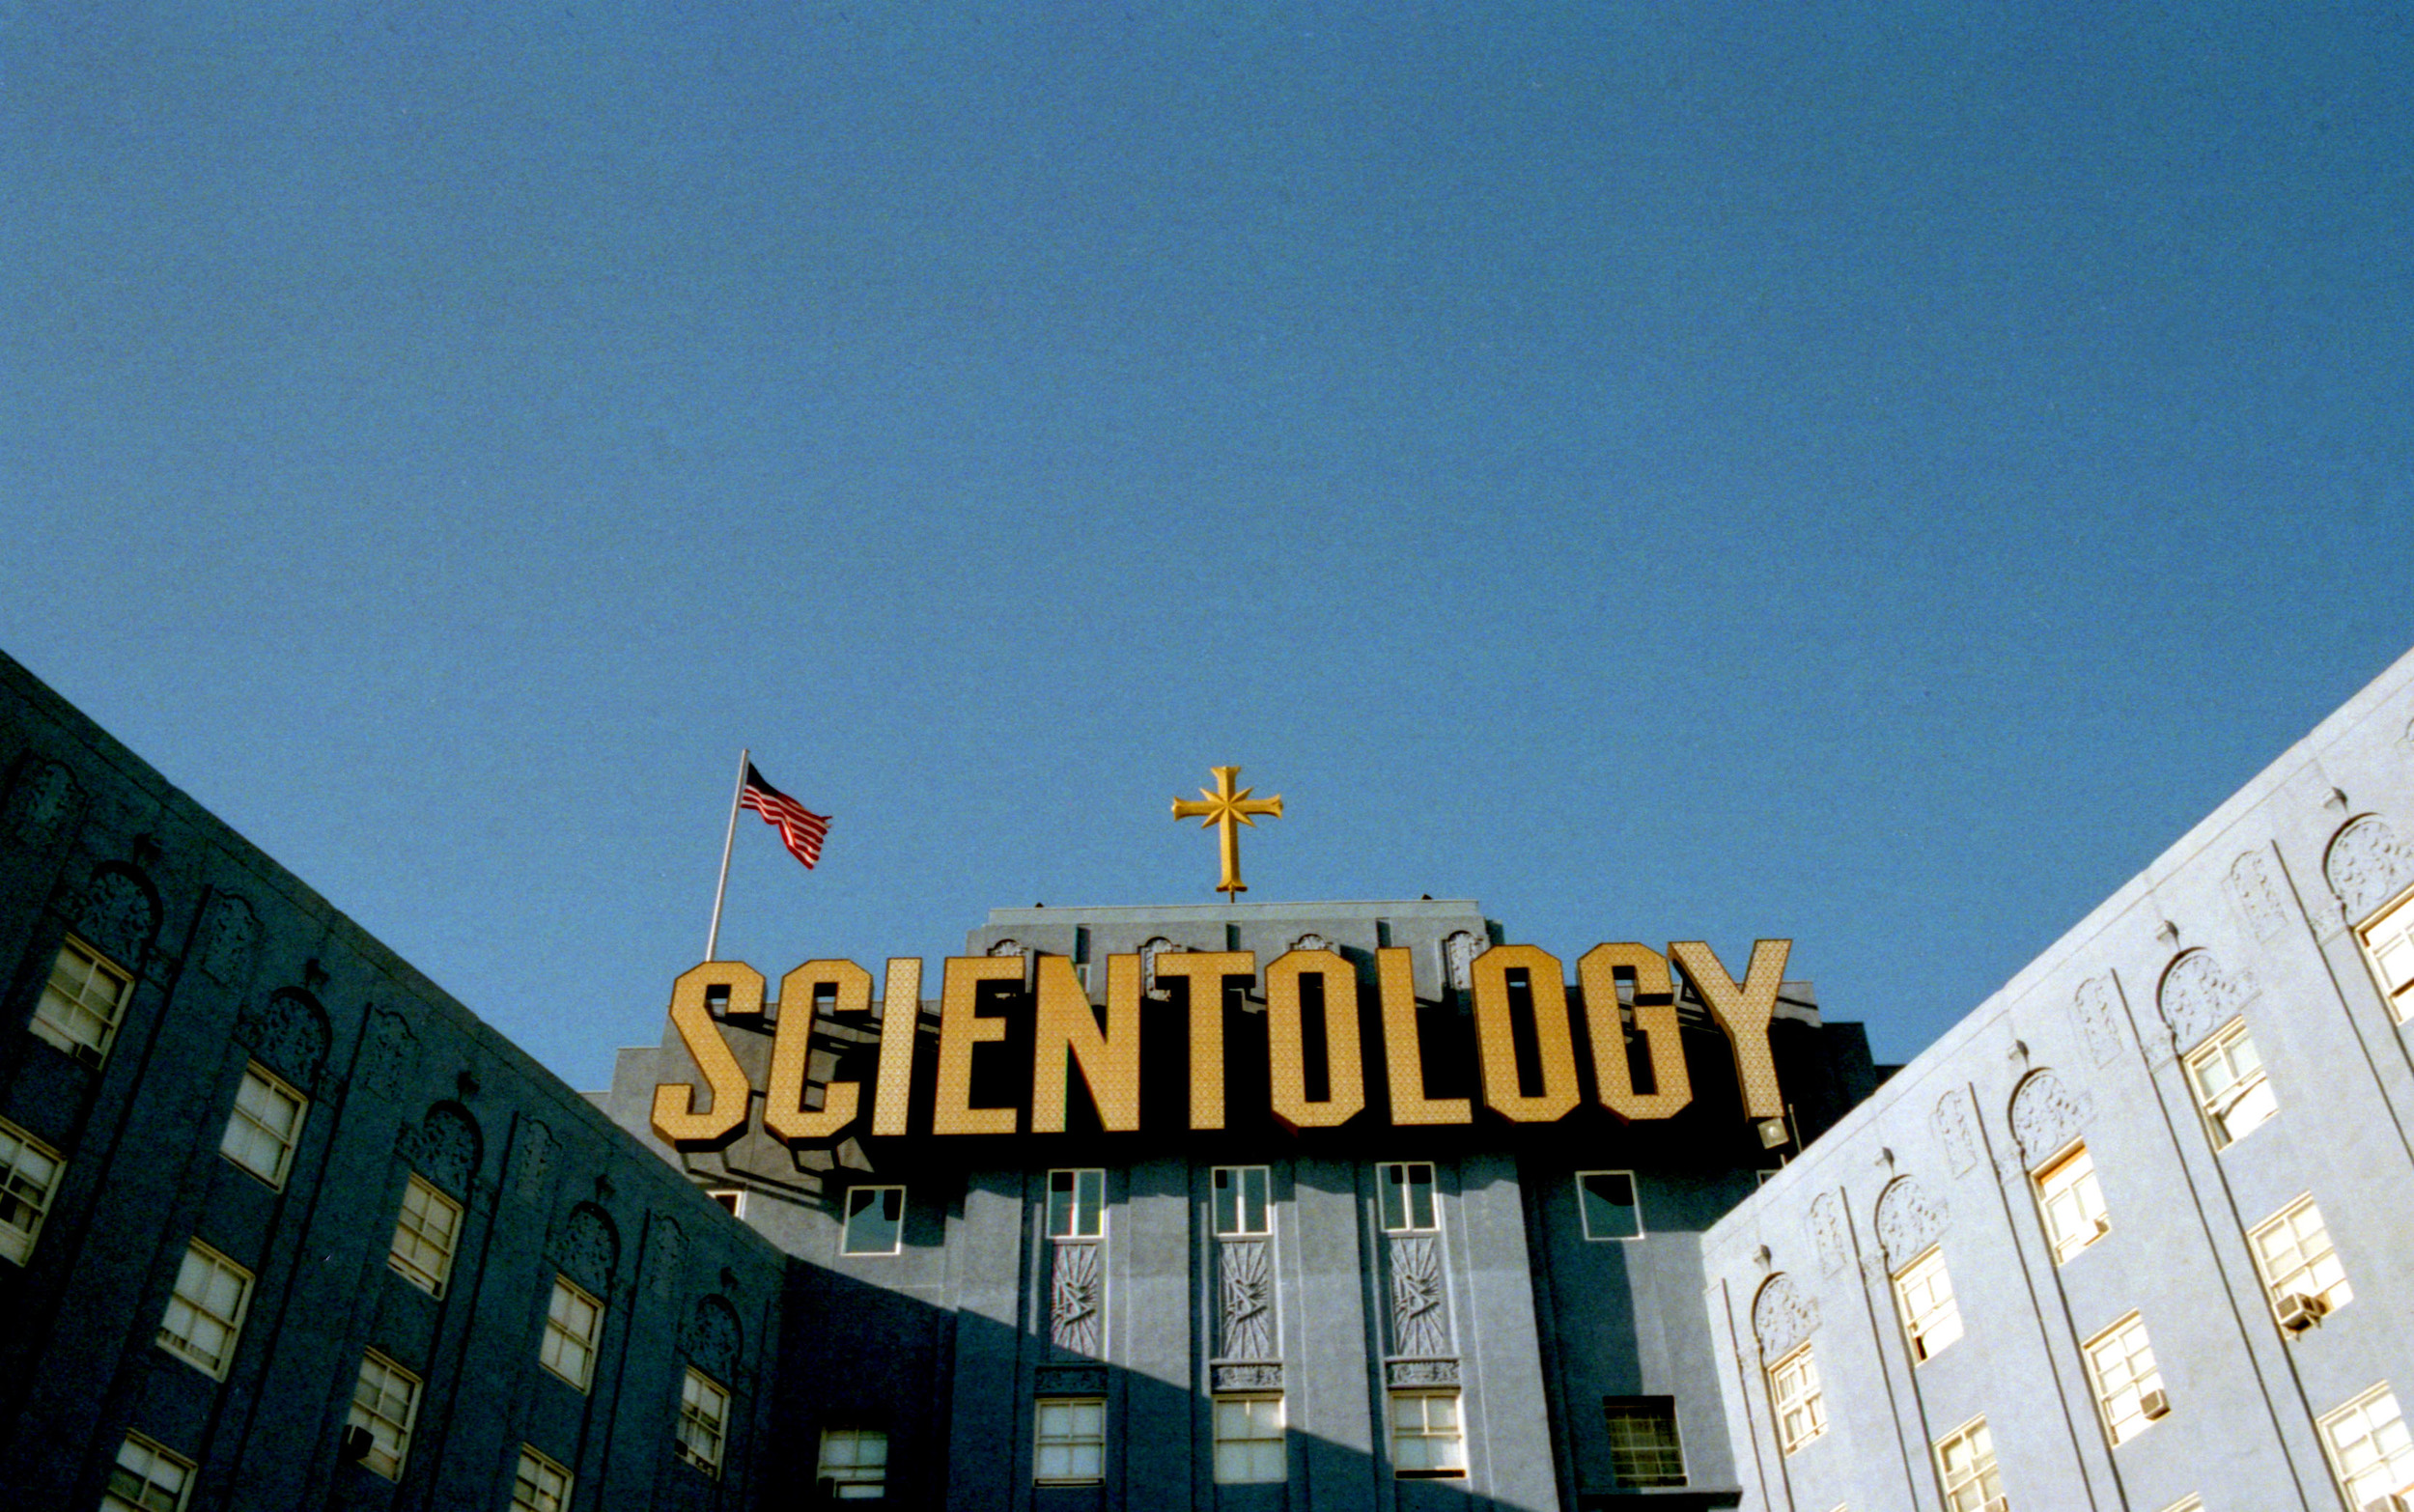 Scientology Headquarters, Hollywood, CA